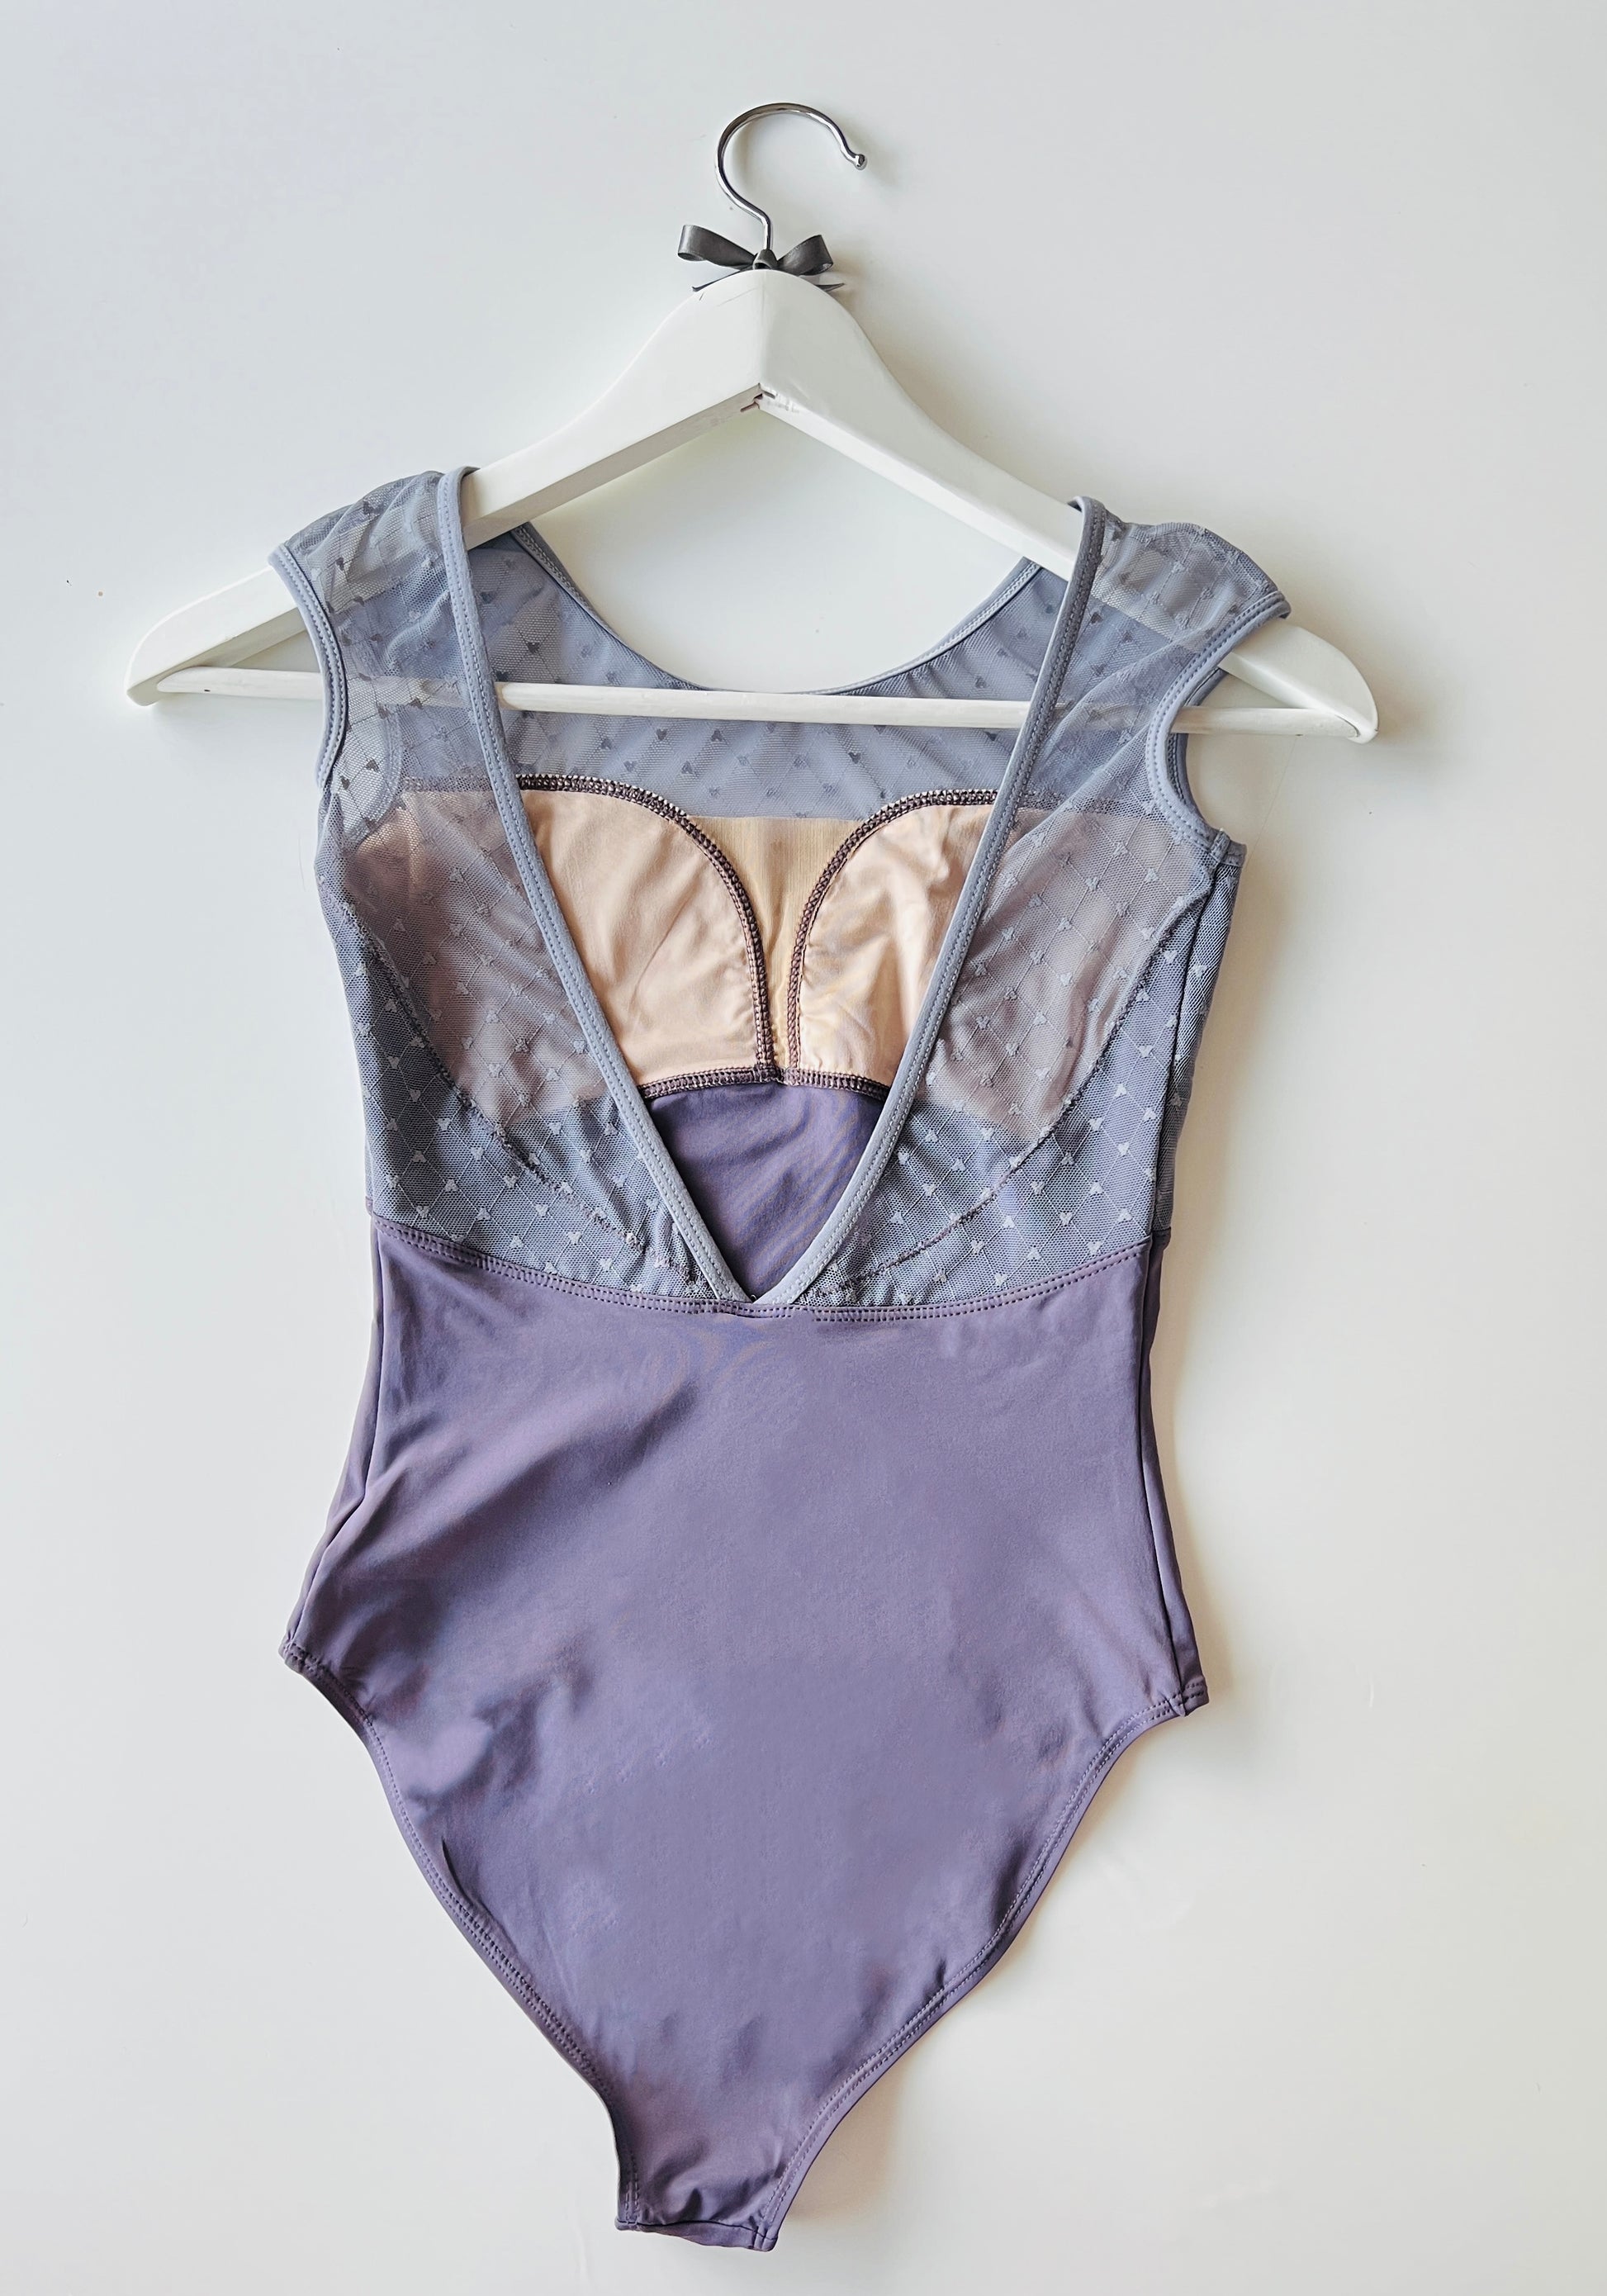 Baiwu Cap sleeve dance ballet leotard from Baiwu with a sweet heart neck line in lavender, lilac, pastel purple from The Collective Dancewear